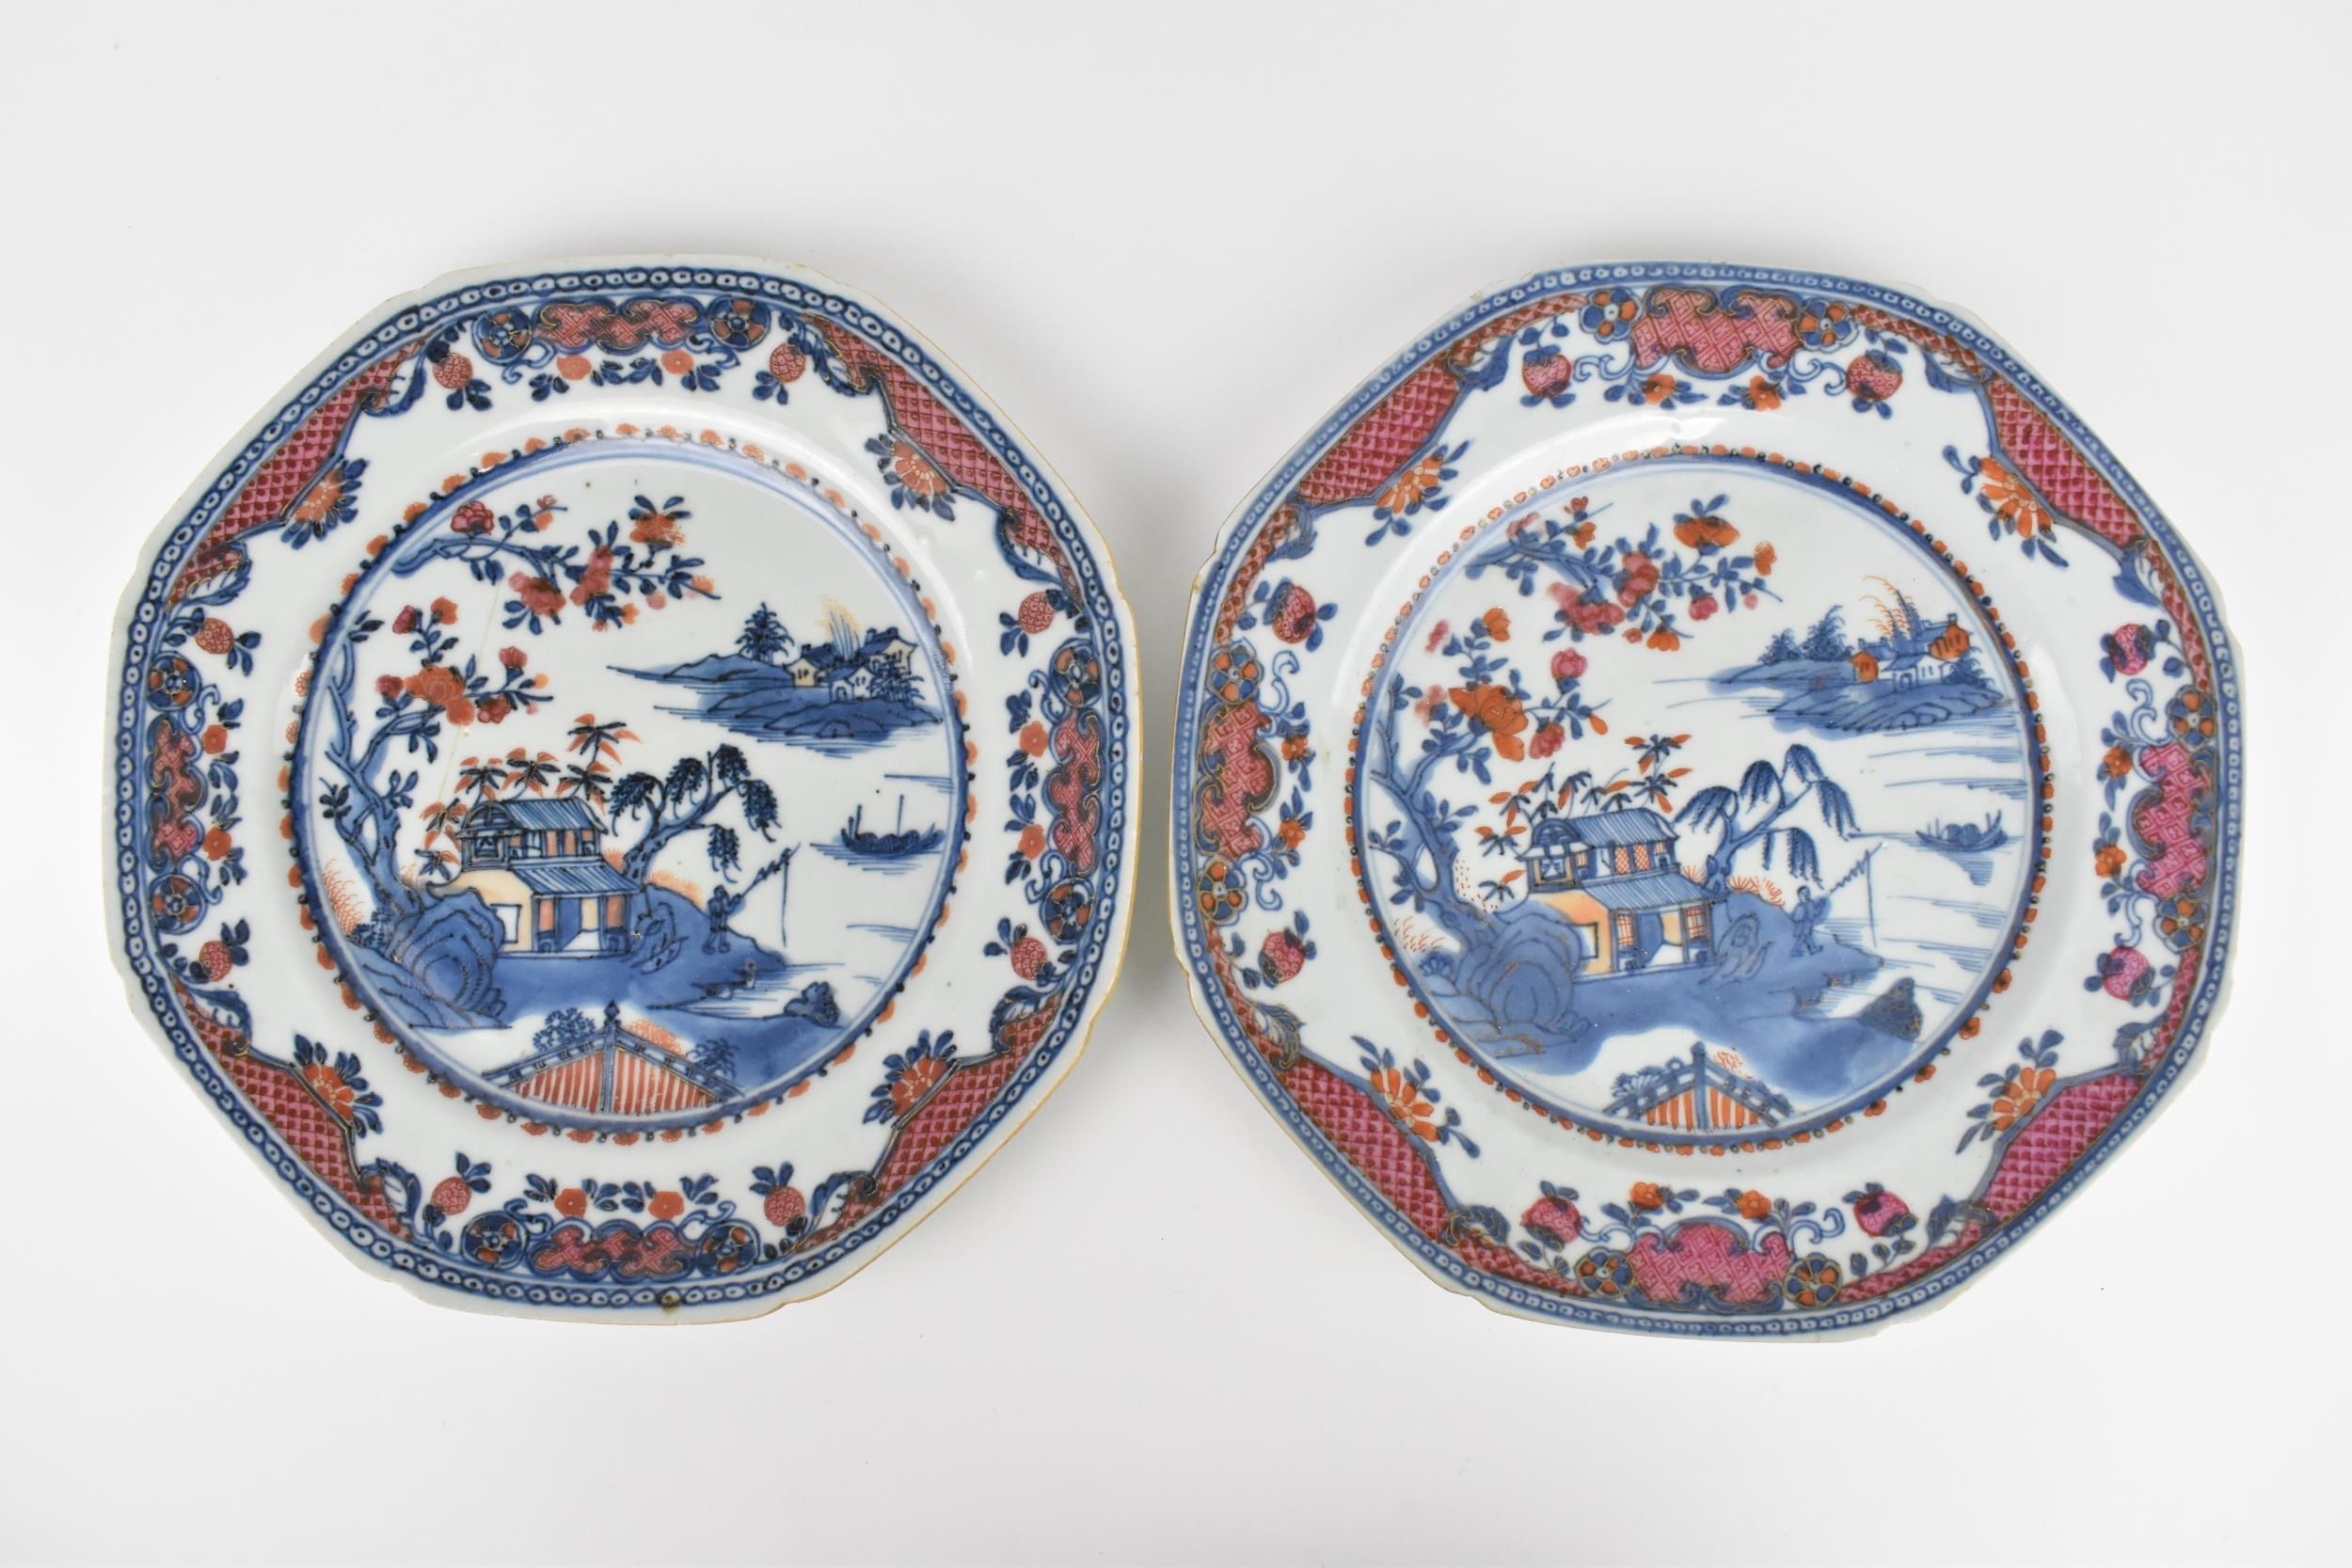 Three Chinese 18th century porcelain plates, to include two of octagonal form with willow pattern - Image 2 of 7